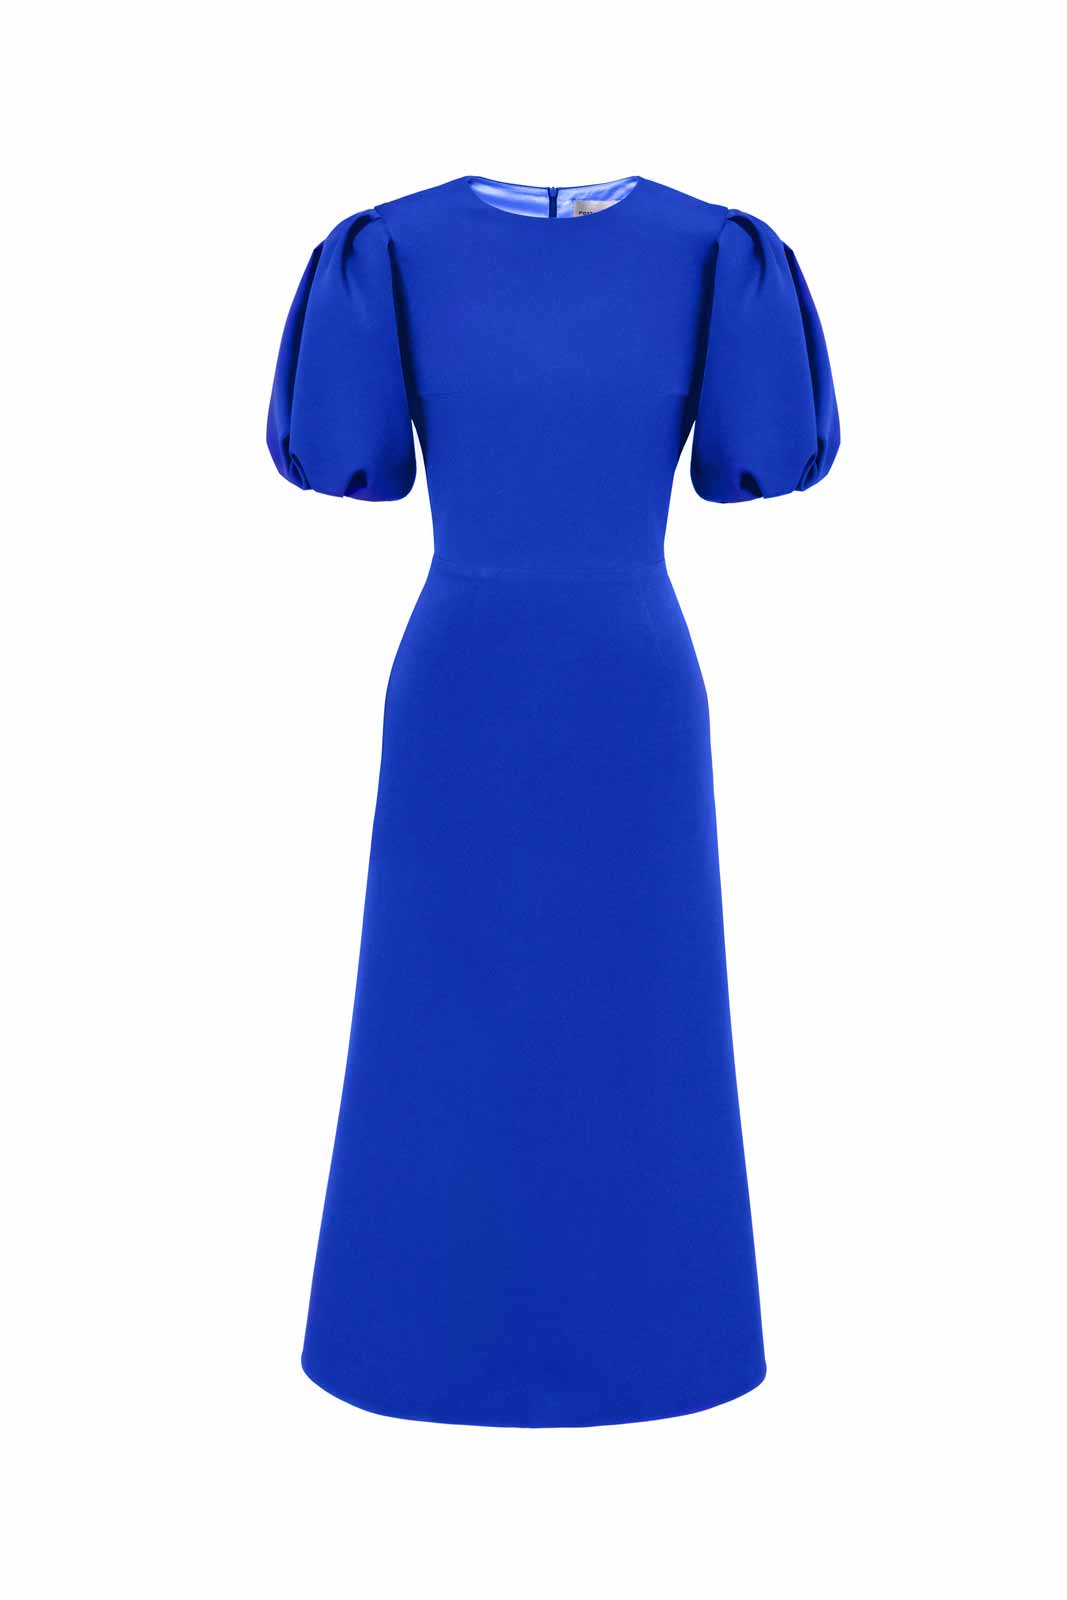 Godet Silhouette Puff Sleeve Midi Dress in Electric Blue